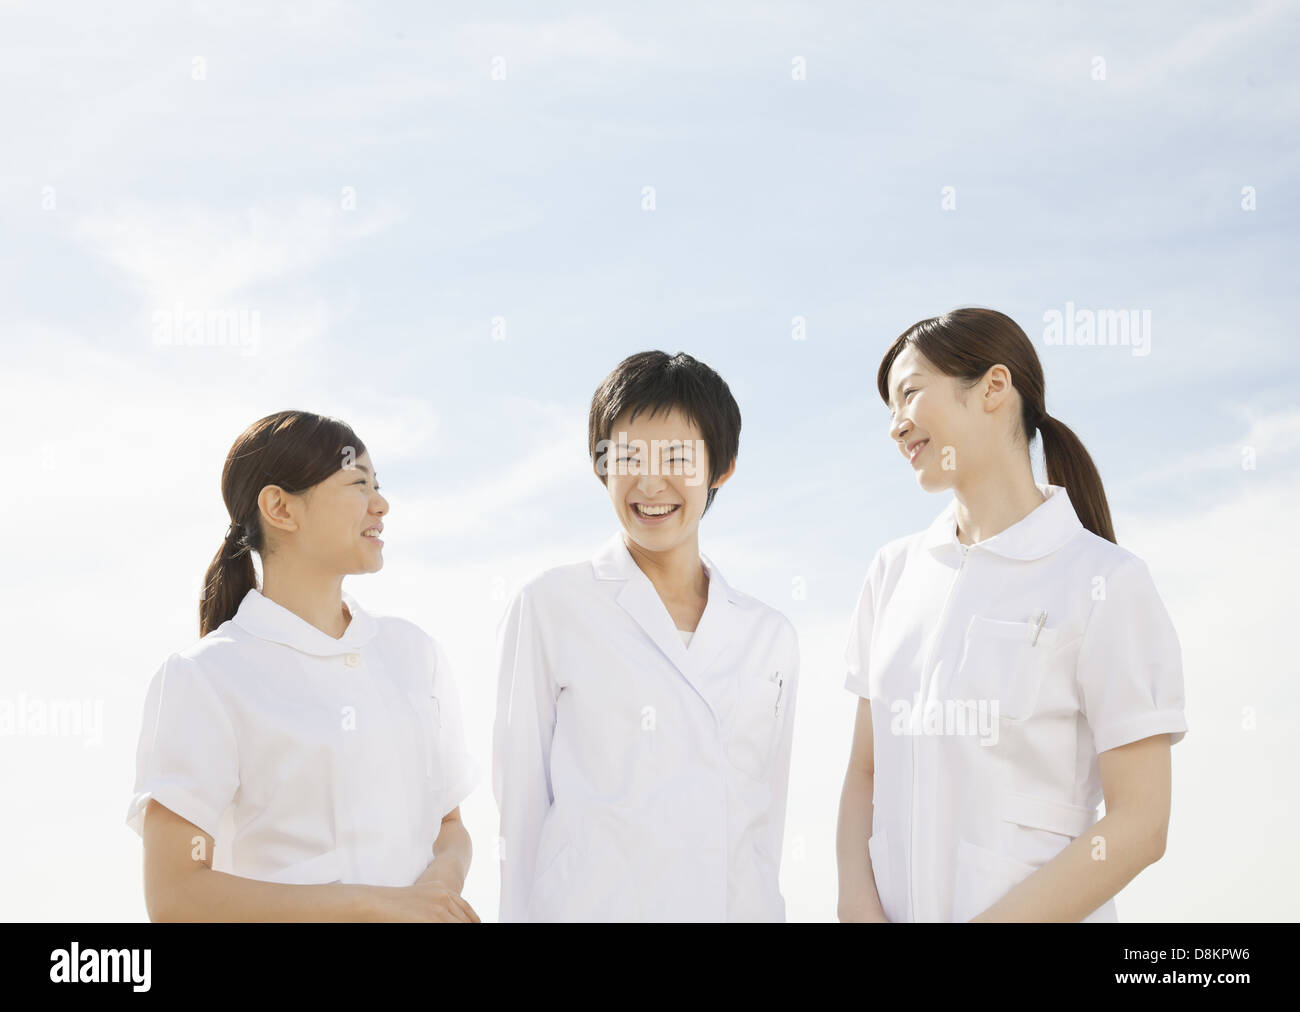 Woman doctor and nurse smiling Stock Photo